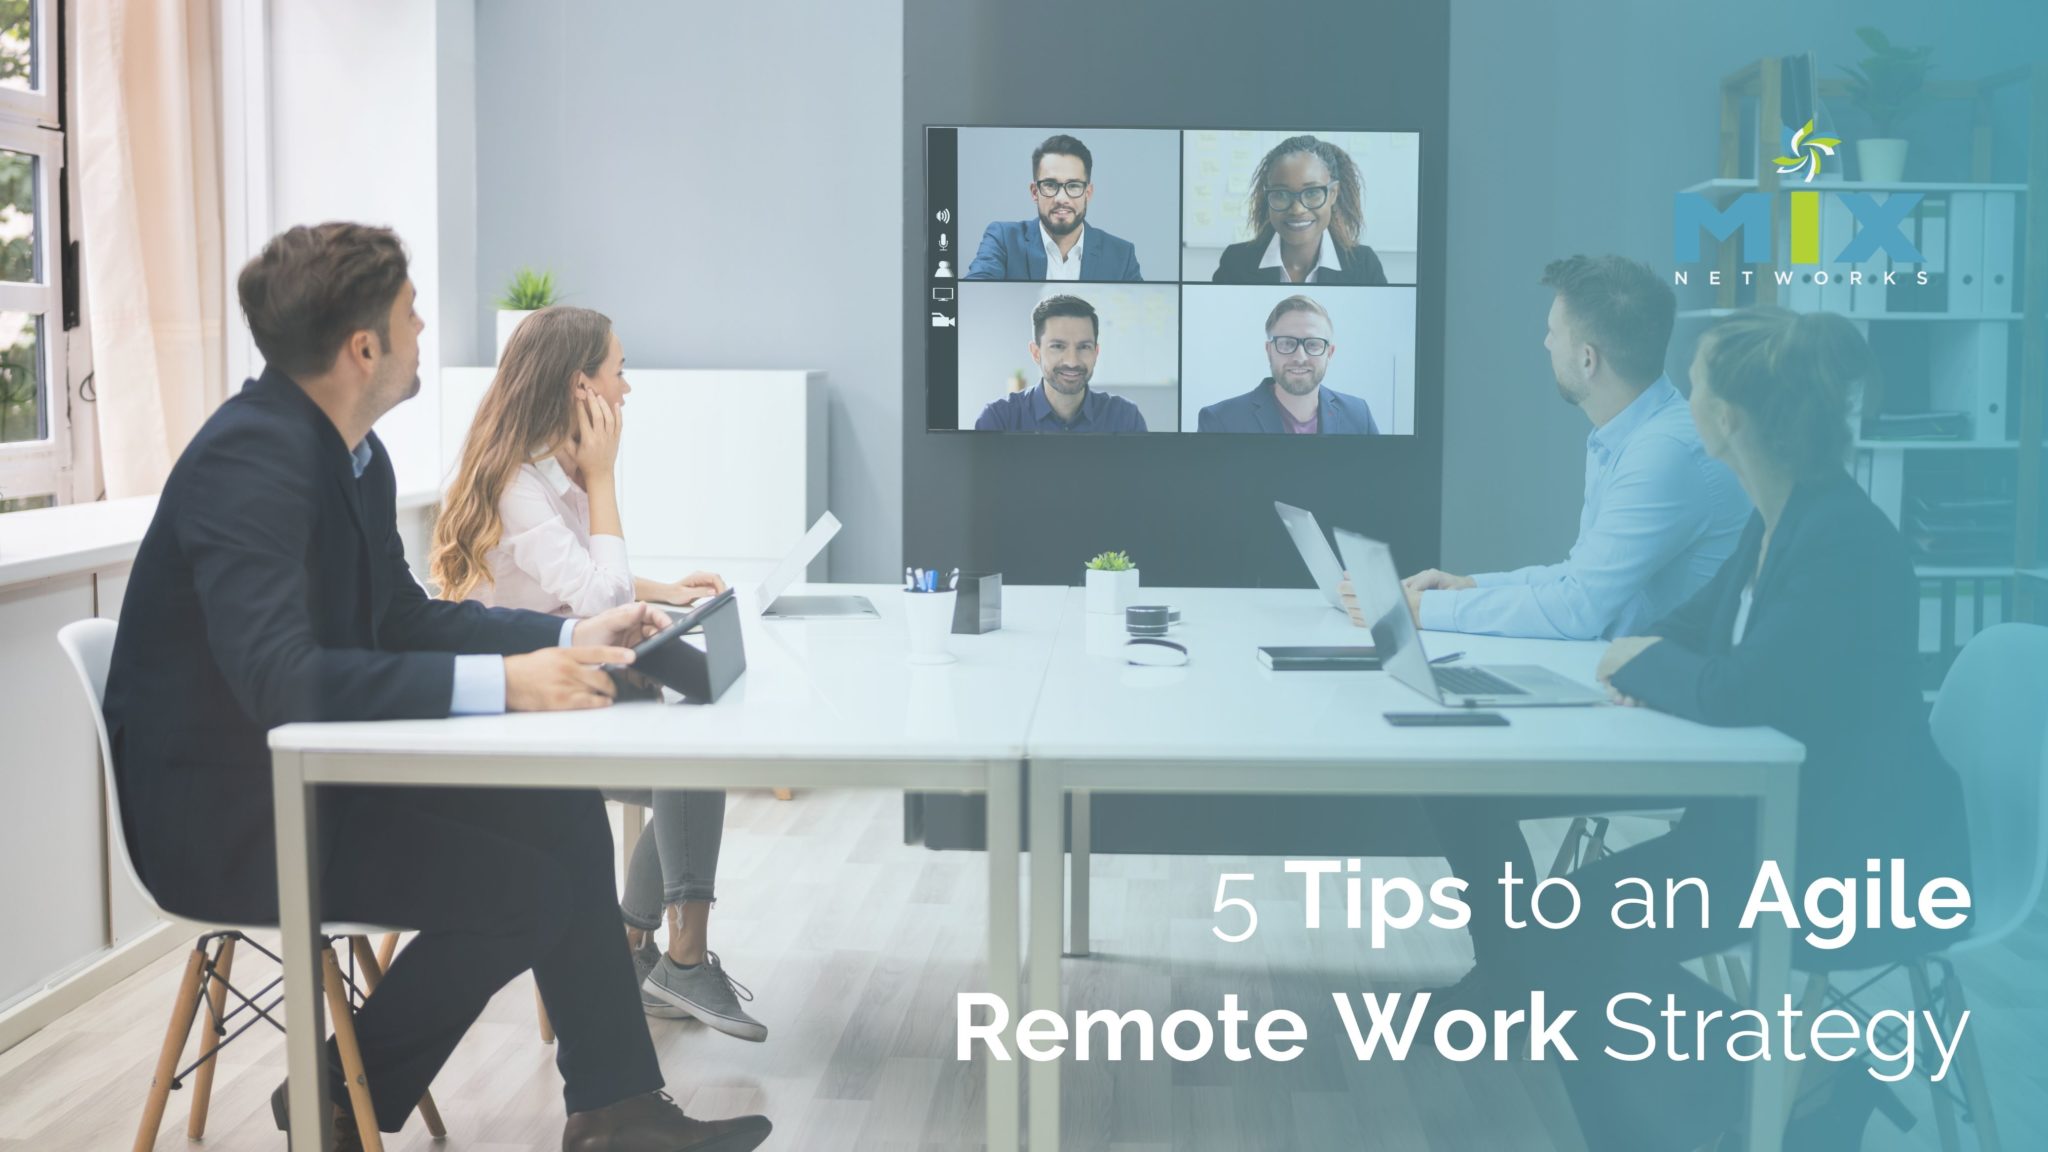 Effective team communications people on video conference call